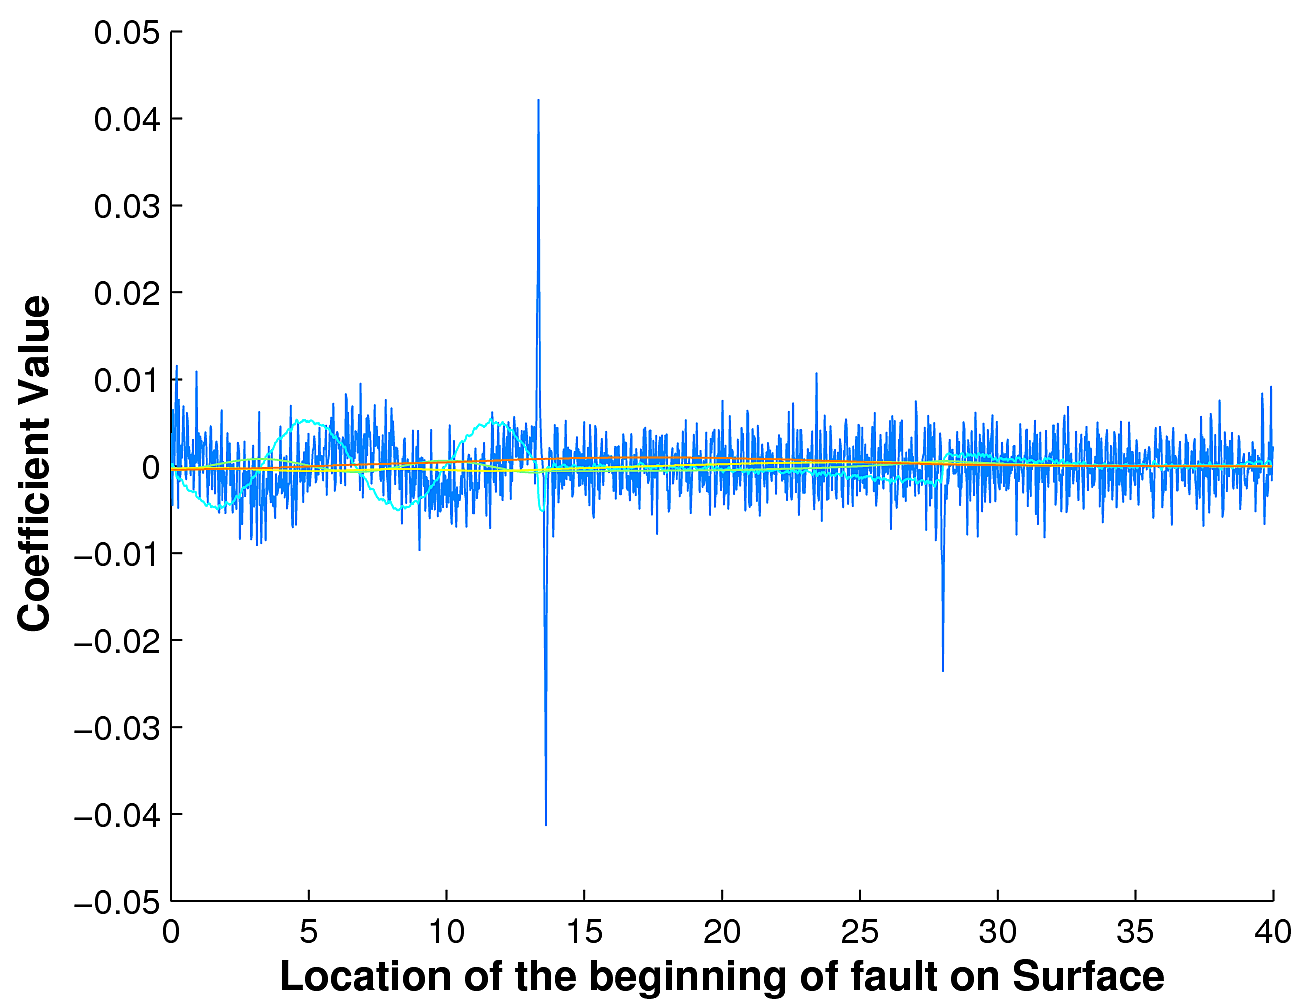 Fault frequency decomposition